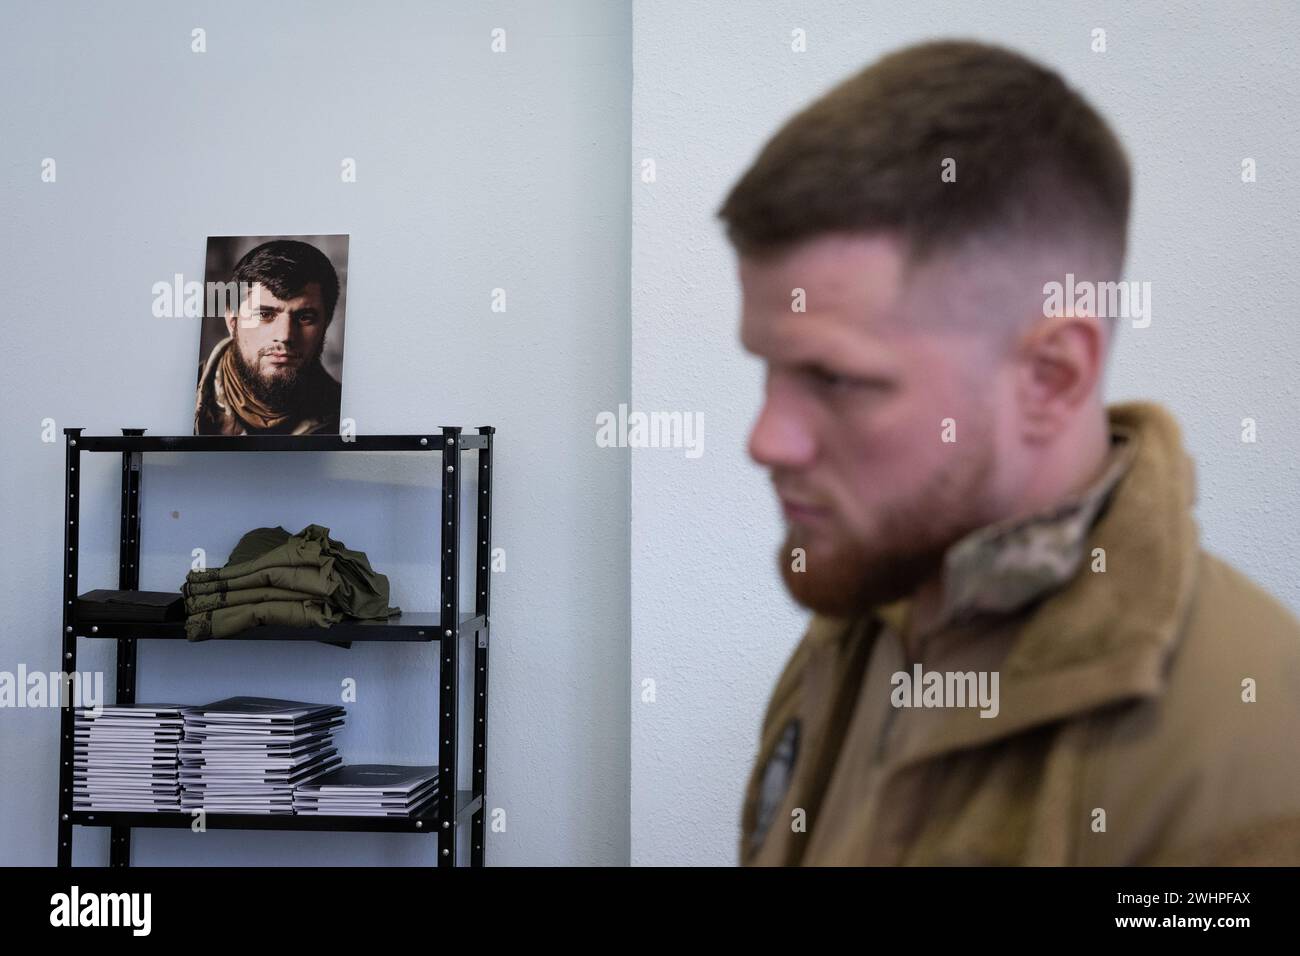 Serhiy Filimonov, commander of a battalion 'Da Vinci's wolves' of the Ukrainian Armed Forces, named of nom-de-guerre of their commander Dmytro Kotsiubailo, Hero of Ukraine, who was killed in a fight against Russian troops near the frontline city of Bakhmut in March 2023, stands in front of a portrait of Dmytro Kotsiubailo in a newly opened recruiting center in Kyiv. A Separate Mechanized Battalion 'Da Vinci Wolves' announced the opening of recruiting centers in several cities across the country. (Photo by Oleksii Chumachenko/SOPA Images/Sipa USA) Stock Photo